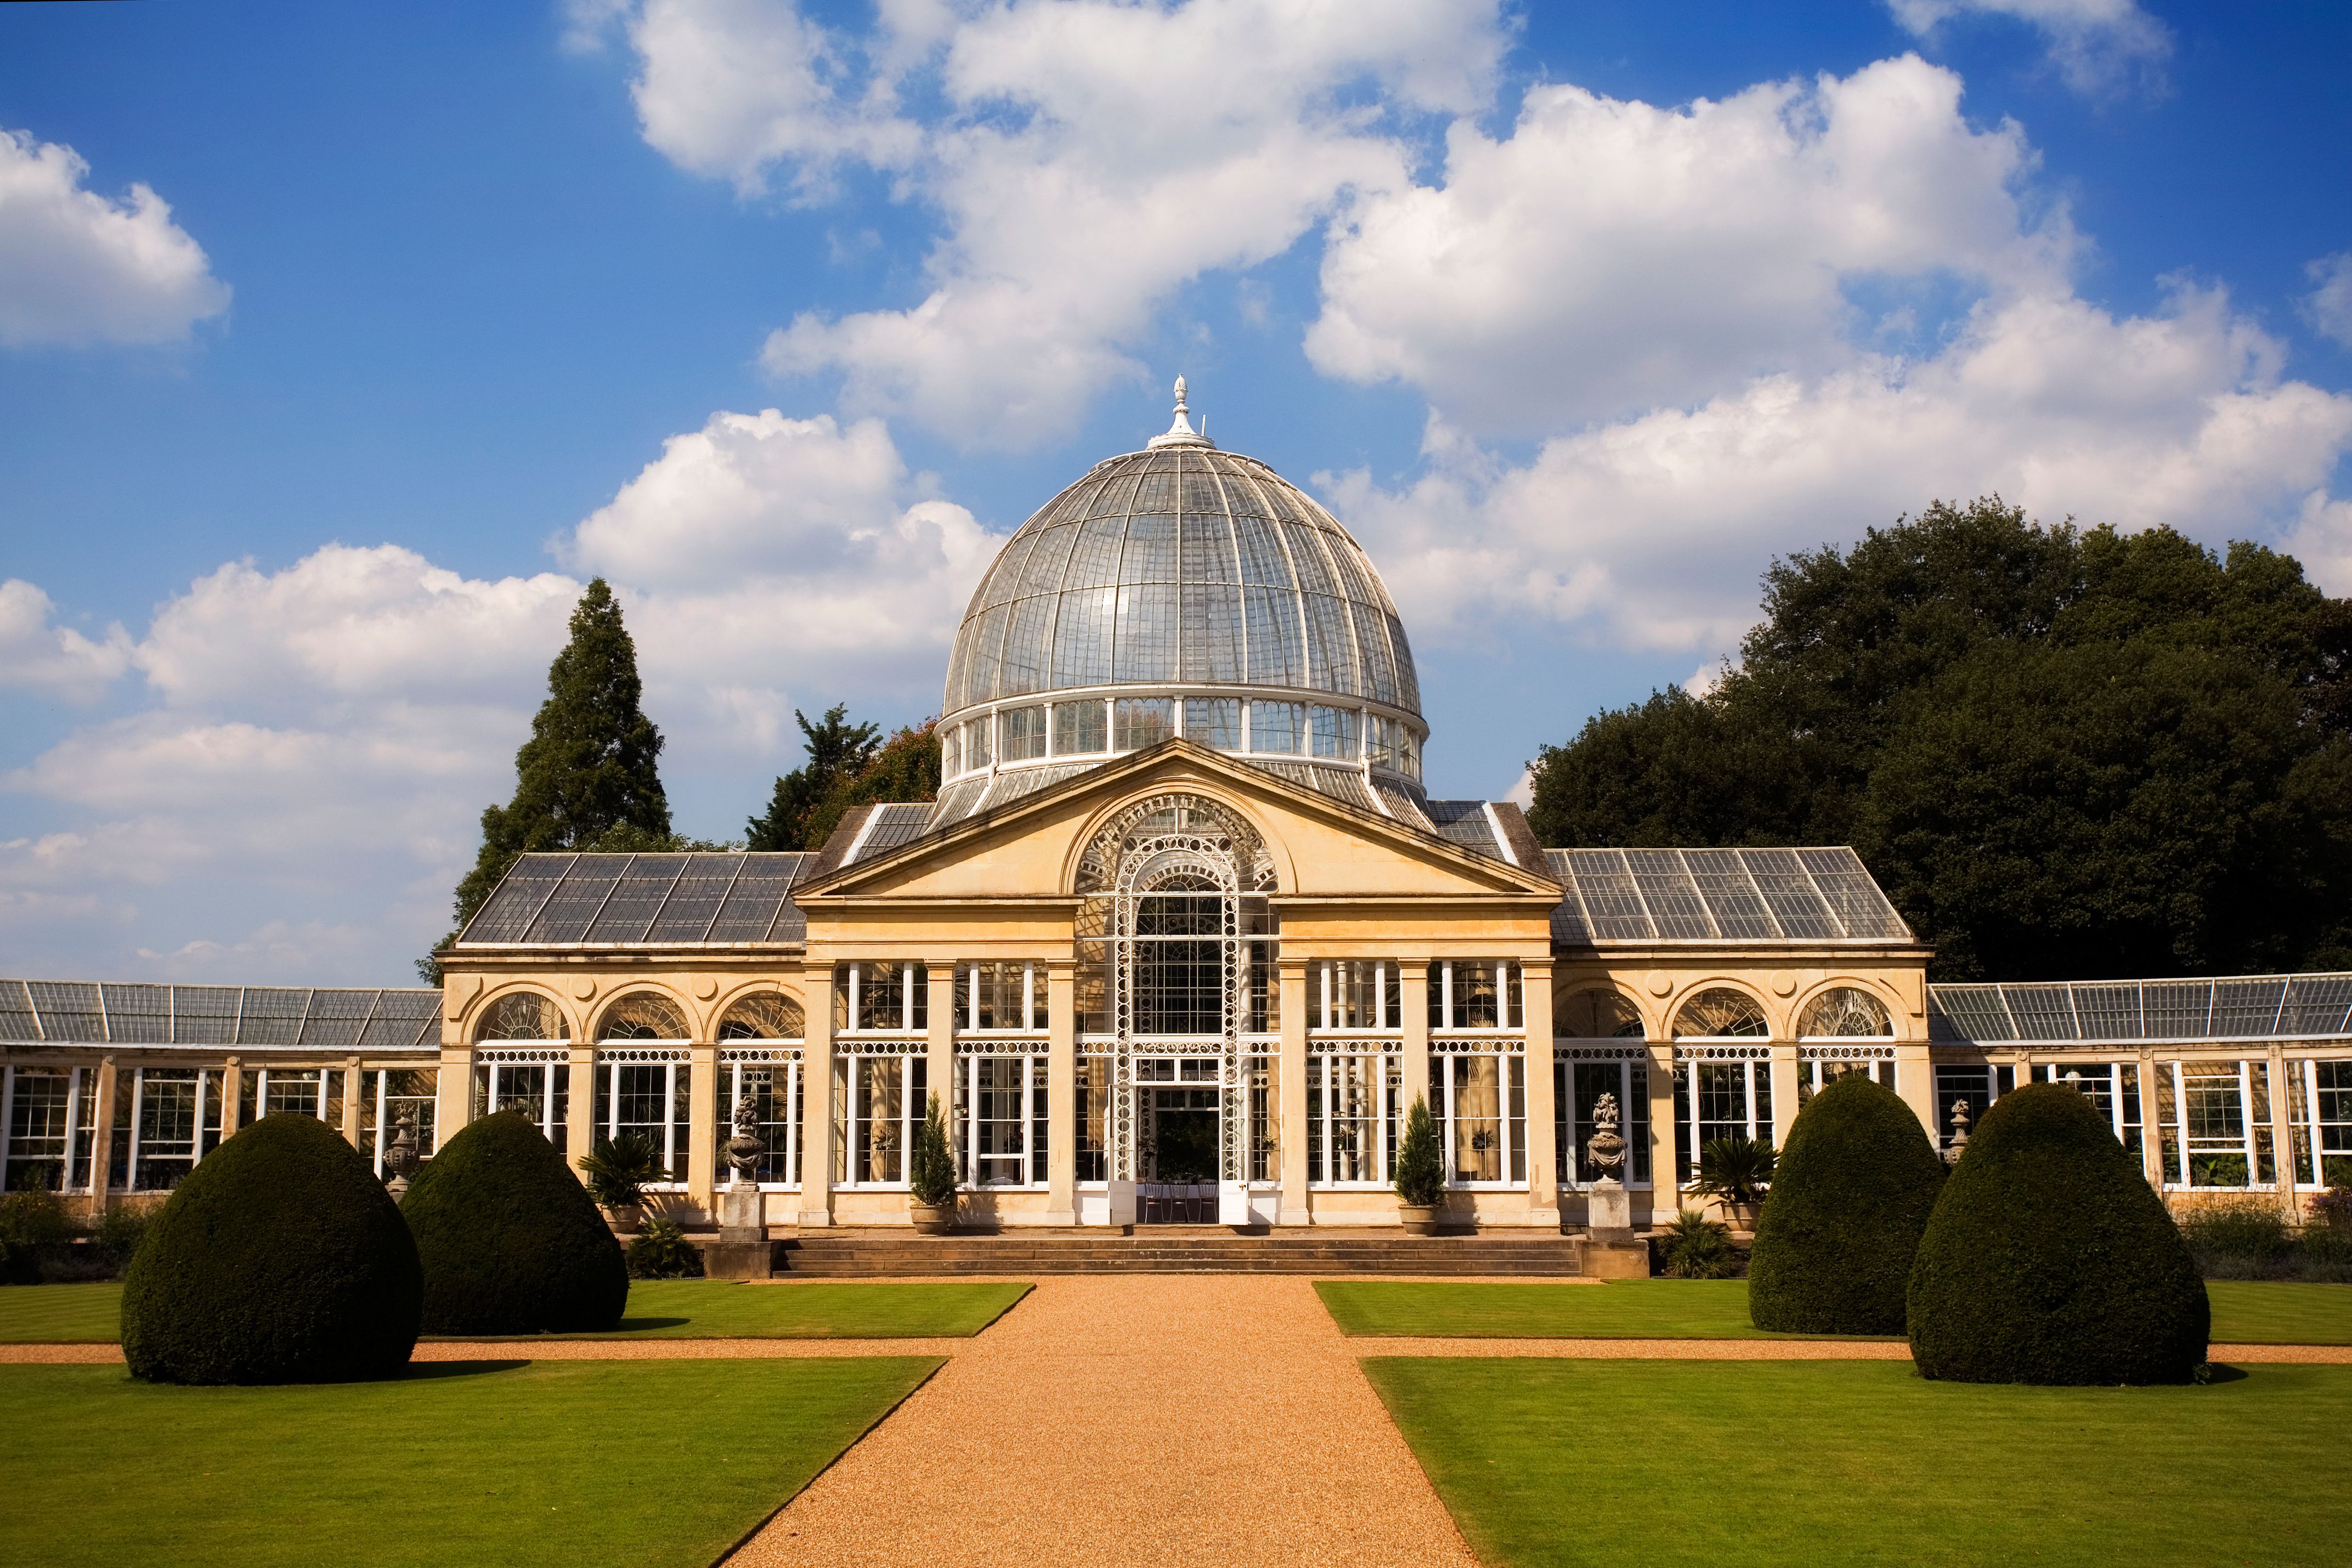 Syon House, Brentford, Middlesex, London, England